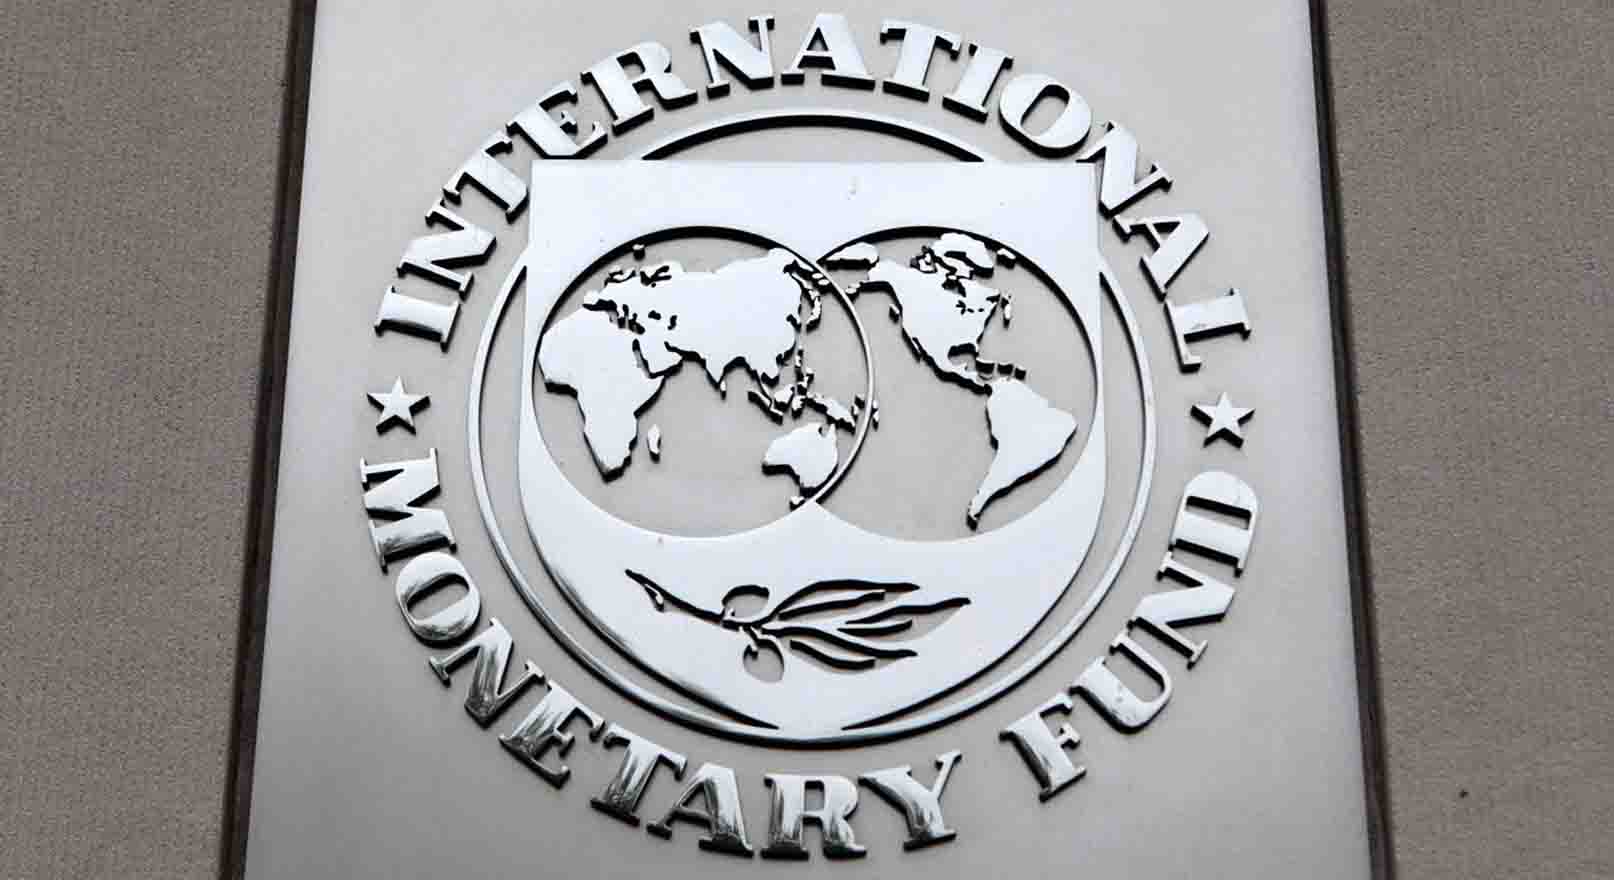 Nigeria Closed 234 Branches, 649 ATMs In 2020 – IMF